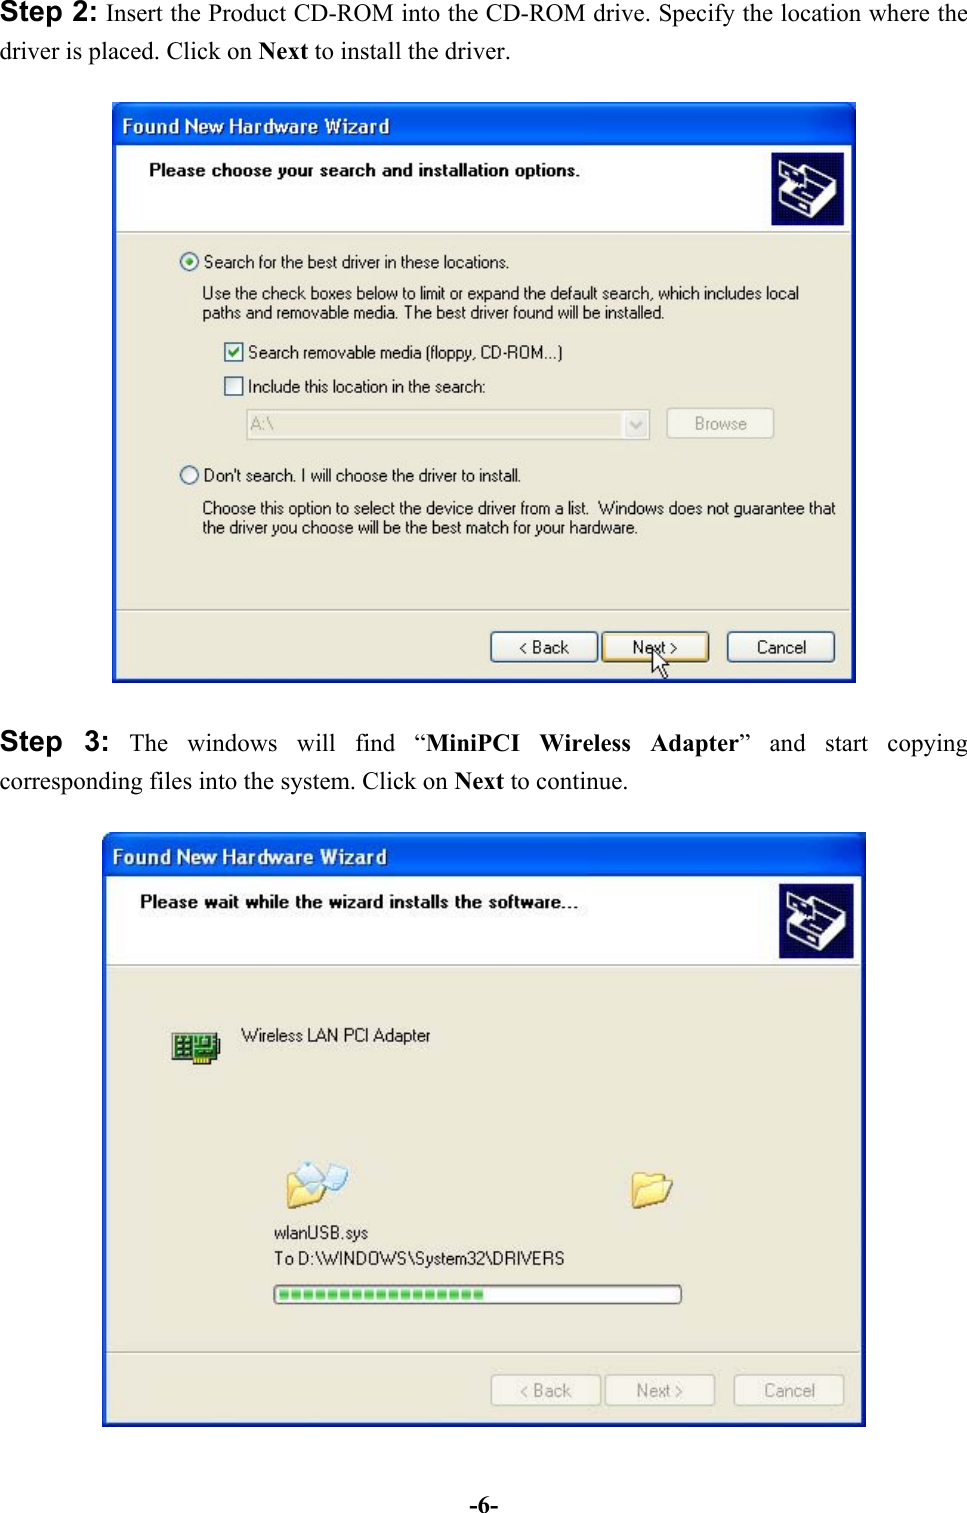 -6-Step 2: Insert the Product CD-ROM into the CD-ROM drive. Specify the location where thedriver is placed. Click on Next to install the driver.Step 3: The windows will find “MiniPCI Wireless Adapter” and start copyingcorresponding files into the system. Click on Next to continue.